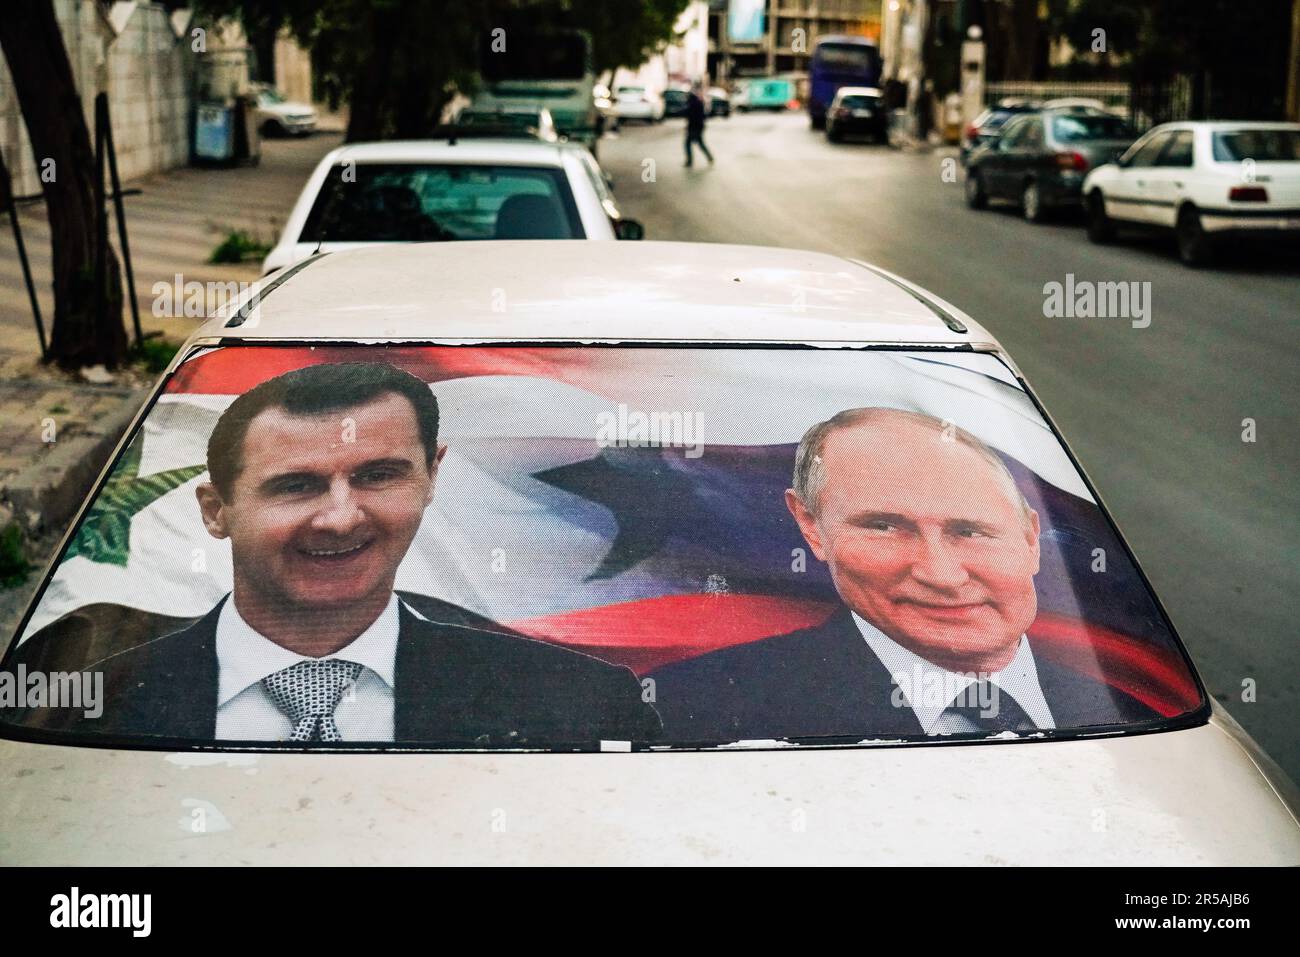 Large posters with portraits of Syrian President Bashar al-Assad and Russian President Vladimir Putin on a car in Damascus, Syria, 31.March 2023   ---   Großplakate mit dem Konterfei des Präsidenten Baschar al-Assad und dem russischen Präsidenten Wladimir Putin an einem Auto in Damaskus, Syrien, 31.March 2023 Stock Photo